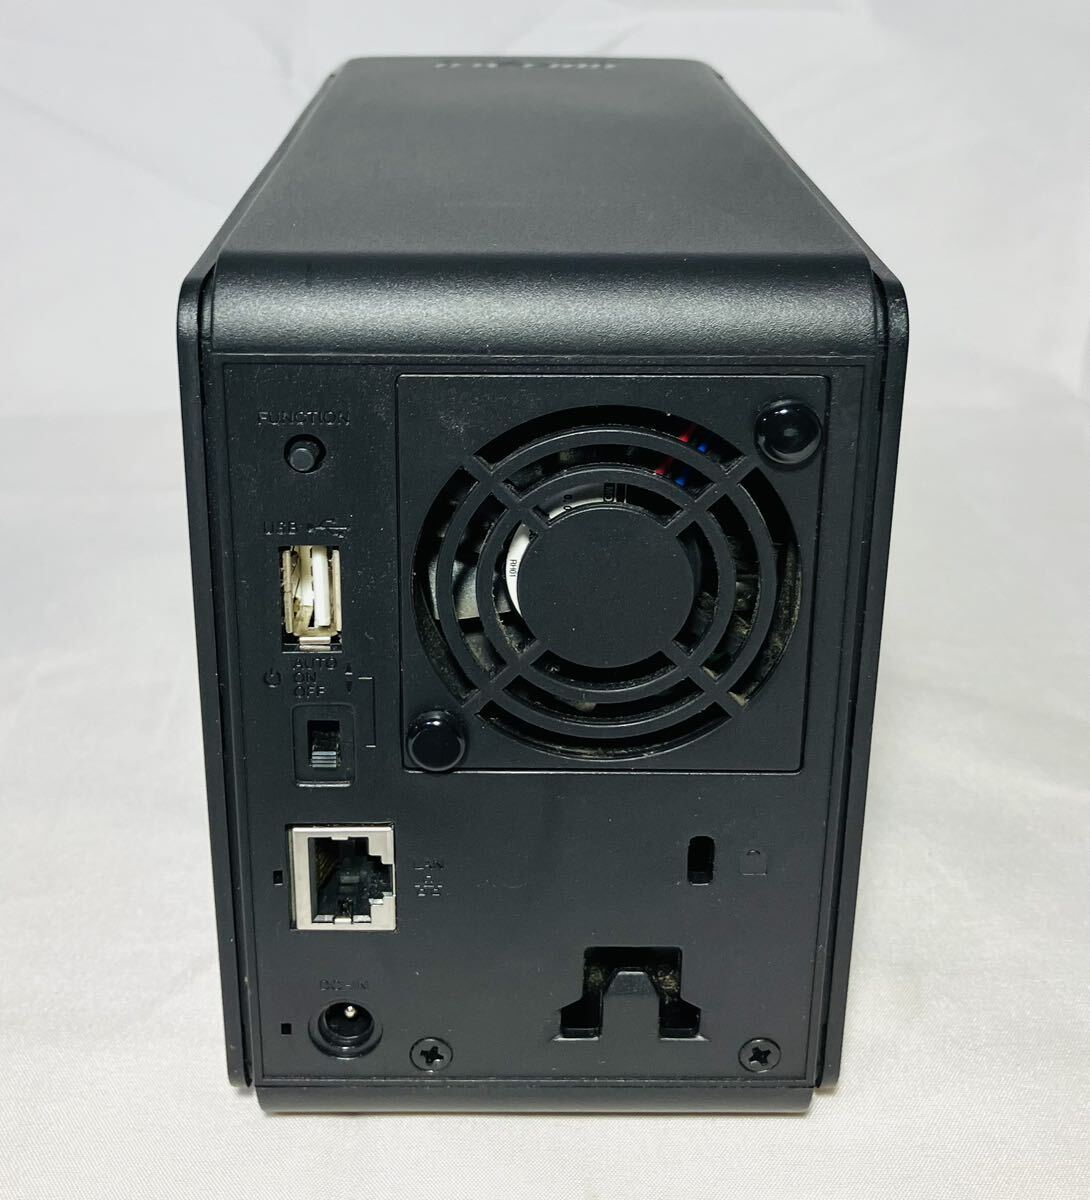 KGNY4058 BUFFALO Buffalo LinkStation LS-WV4.0TL/R1 NAS 4TB attached outside HDD hard disk Junk present condition goods ②